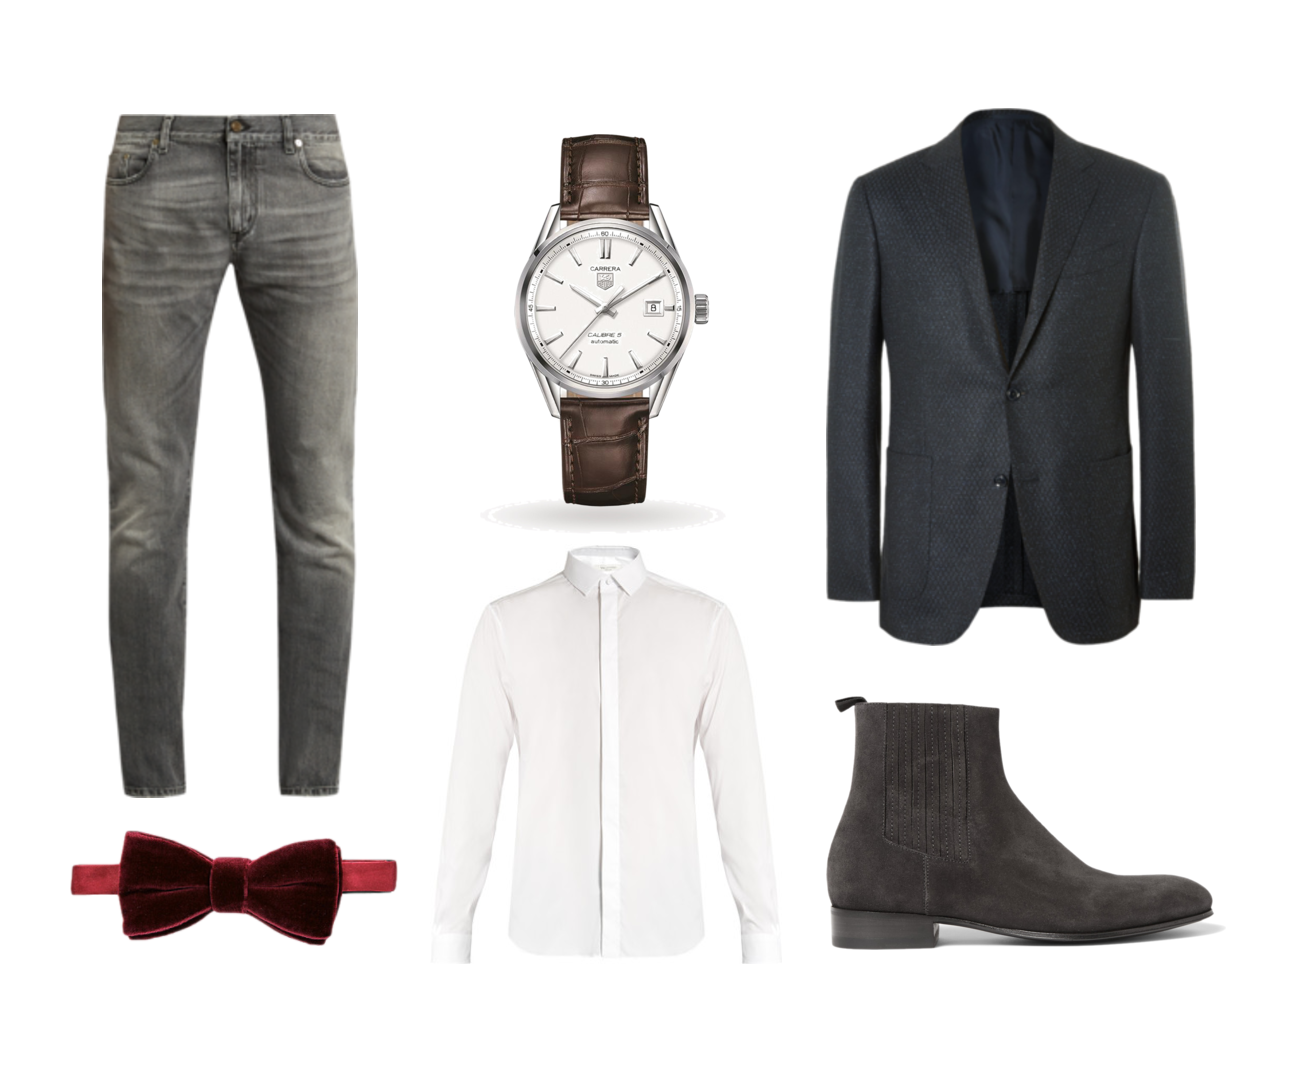 new years eve outfits men